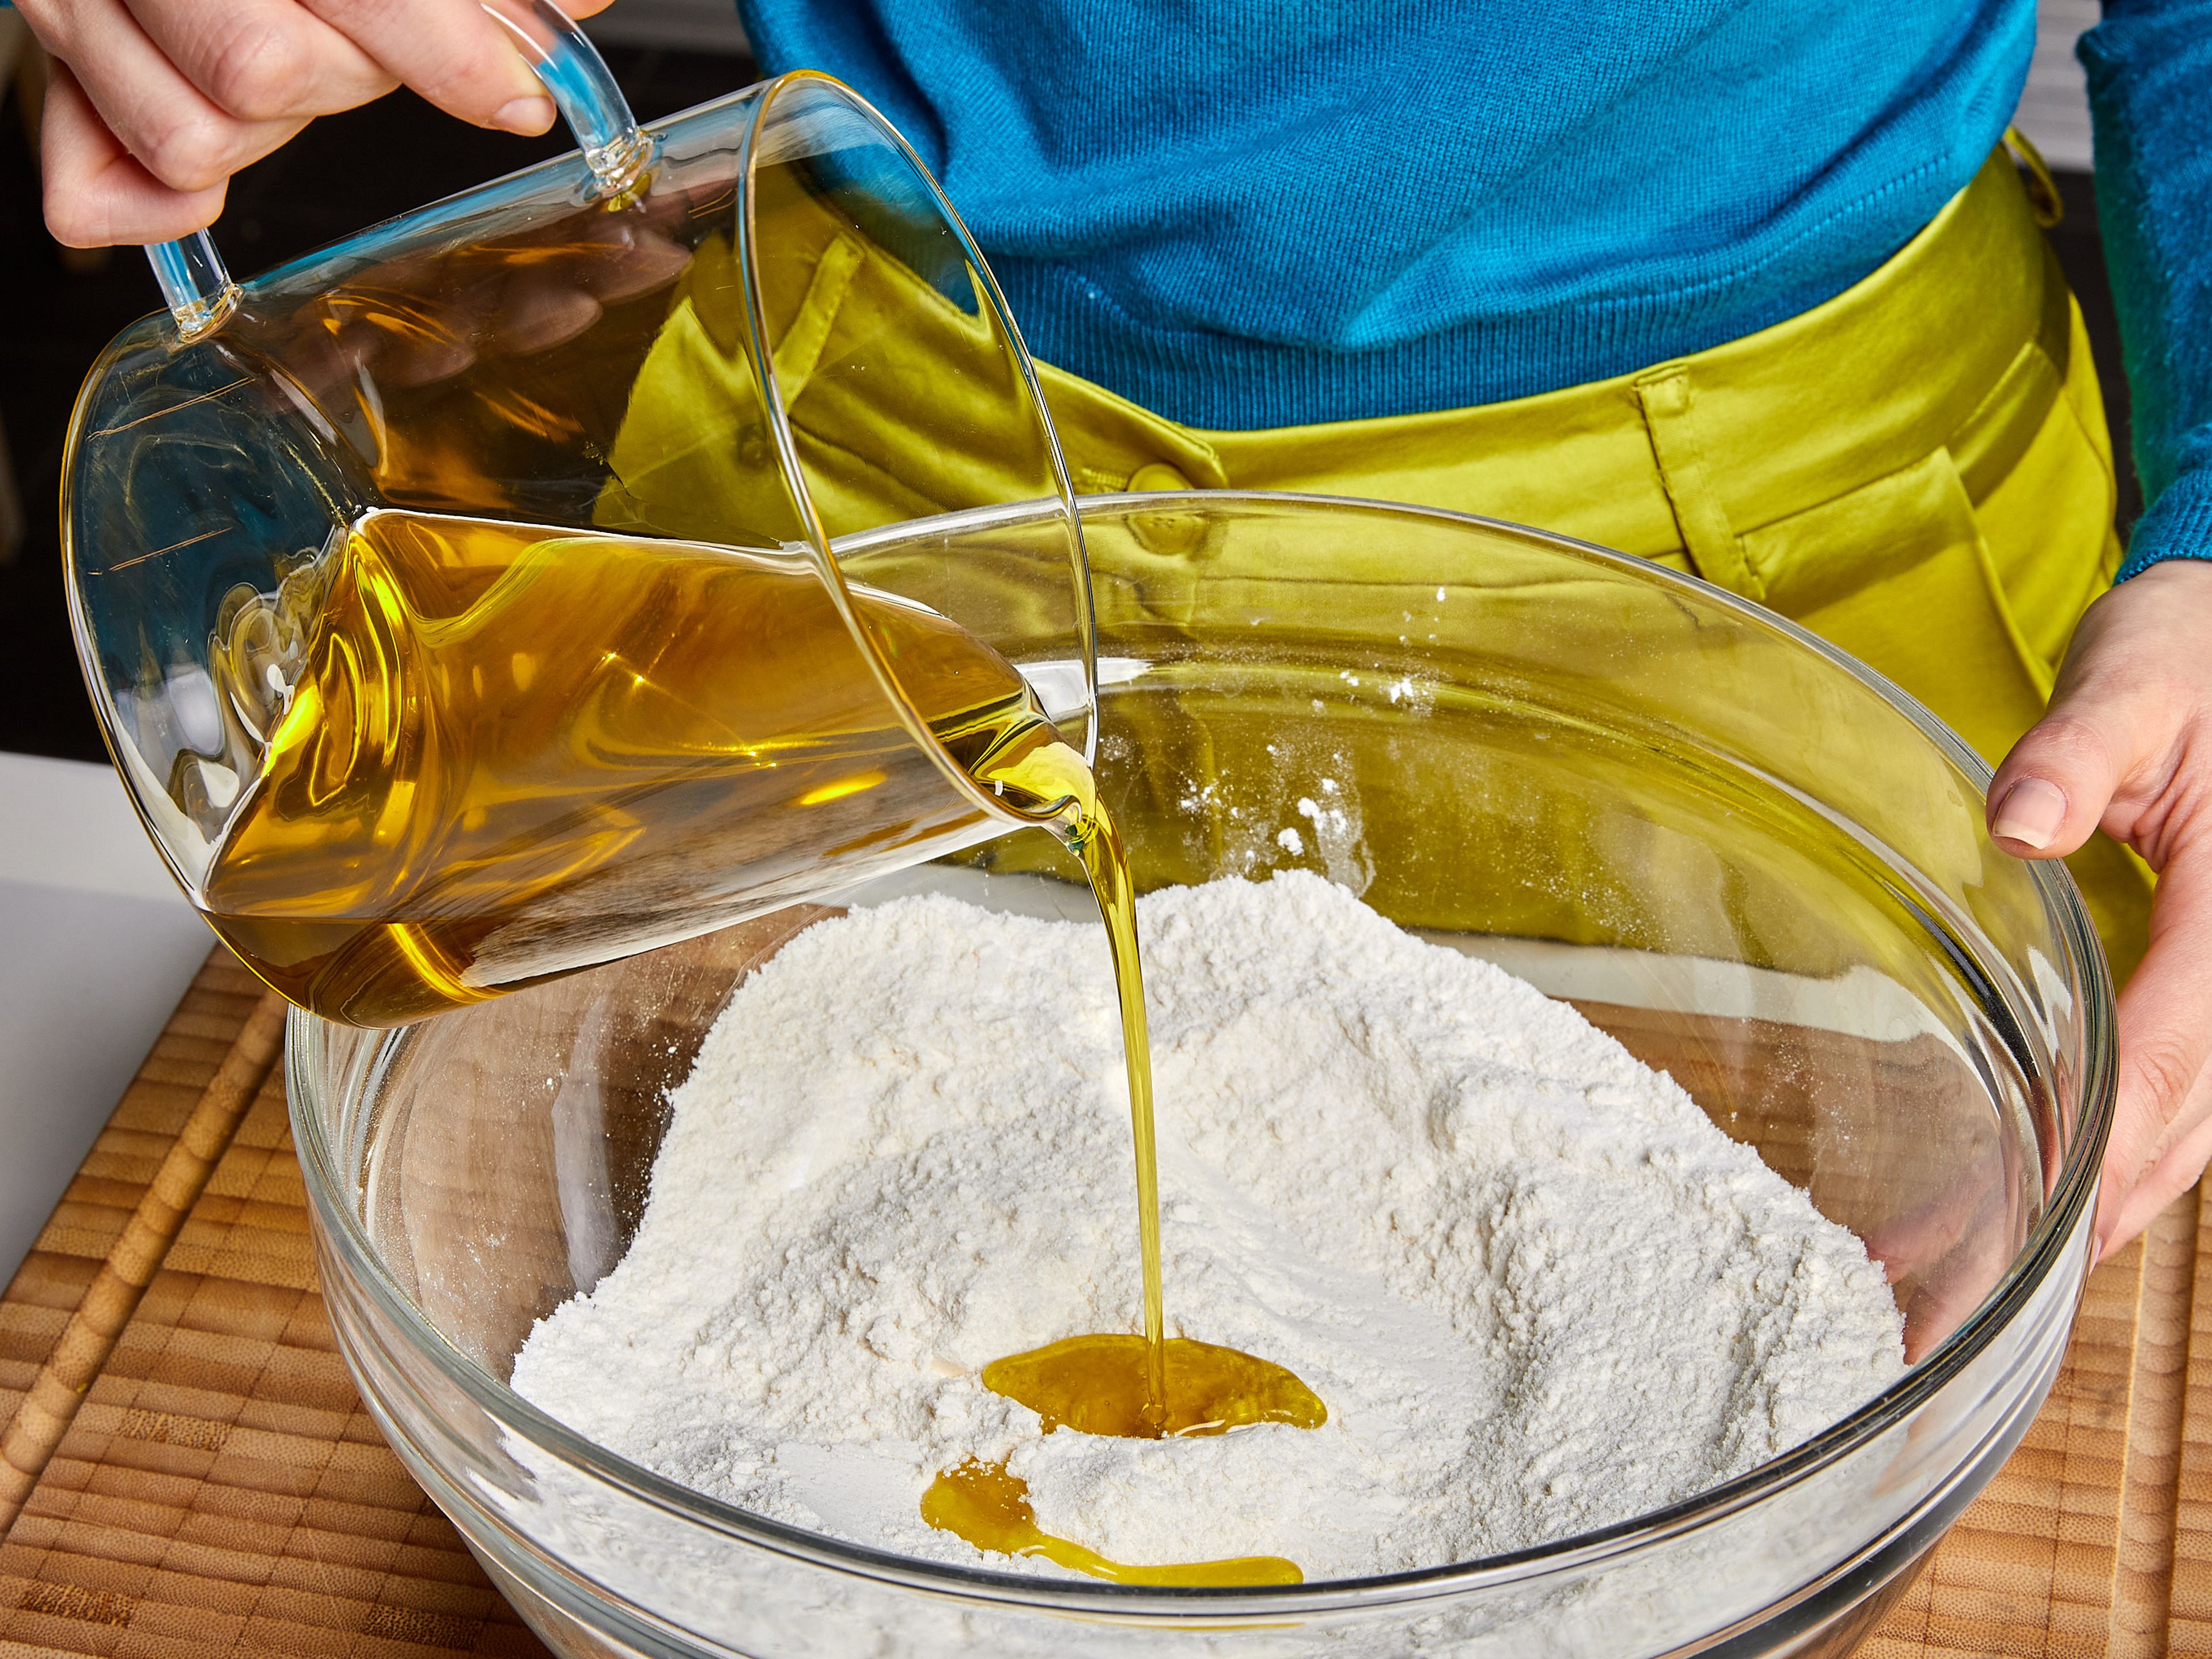 Add flour, sugar, baking powder, and salt to a large mixing bowl. Mix well. Add oat milk, extra virgin olive oil, vanilla extract, lemon juice and zest and mix well until no lump forms.